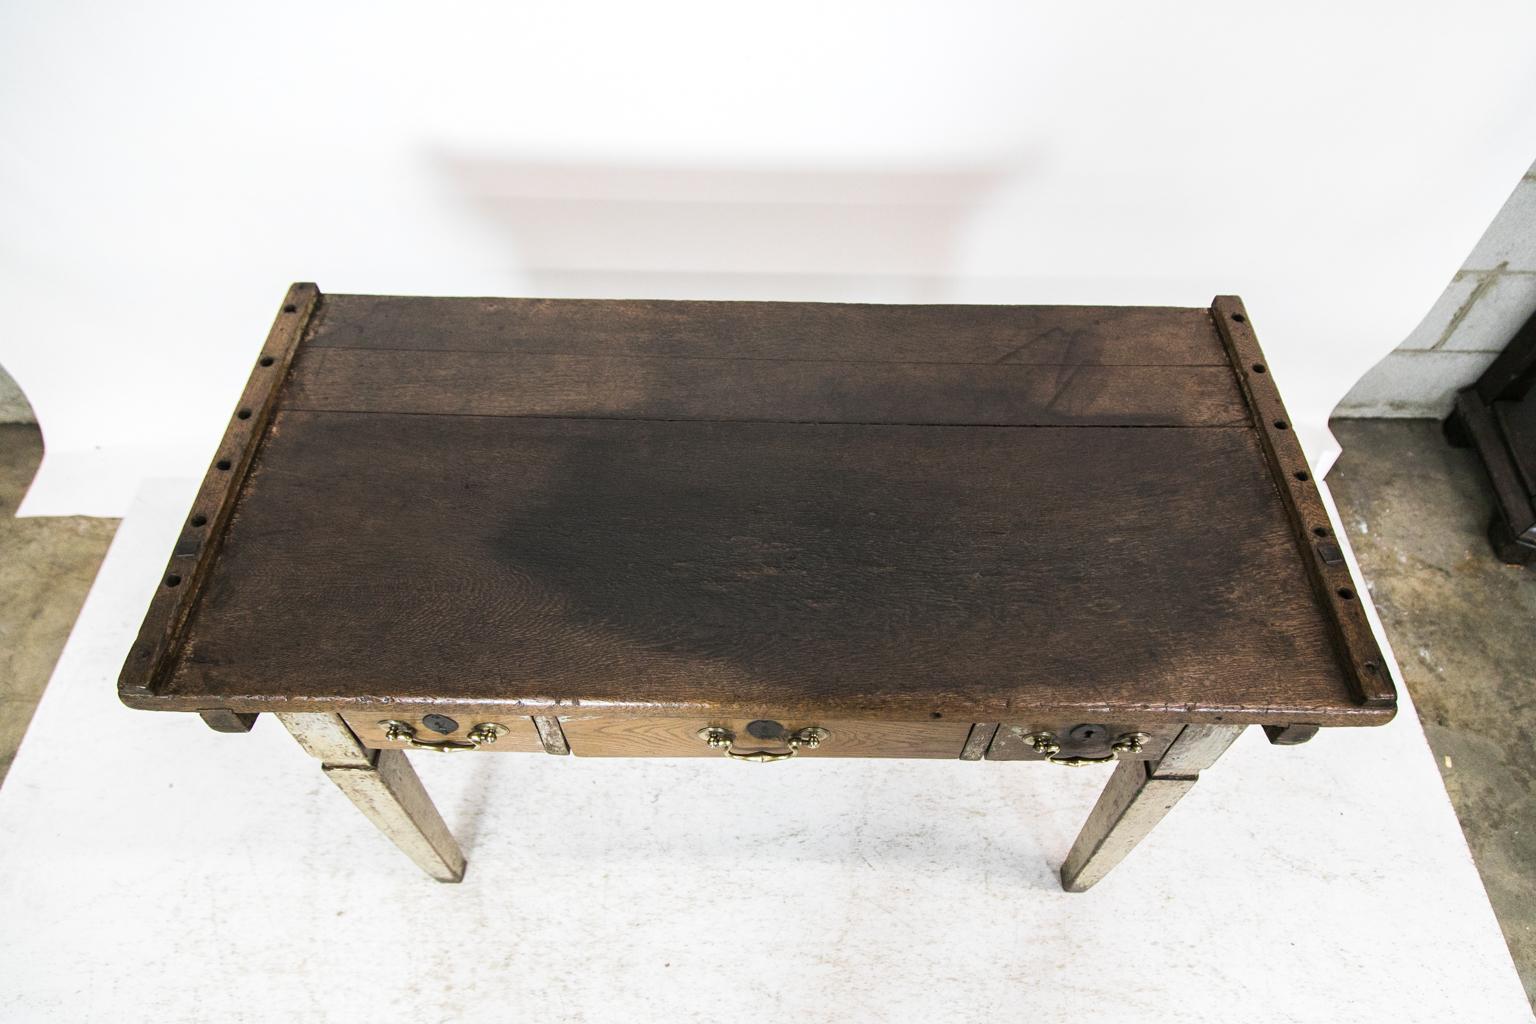 This work table has square tapered legs. There are traces of the original gray-blue paint throughout. The wood is oak and has a 1 1/8-inch-thick top which is secured to the base with 1 3/8-inch-thick dove tailed batten cleats that are secured with